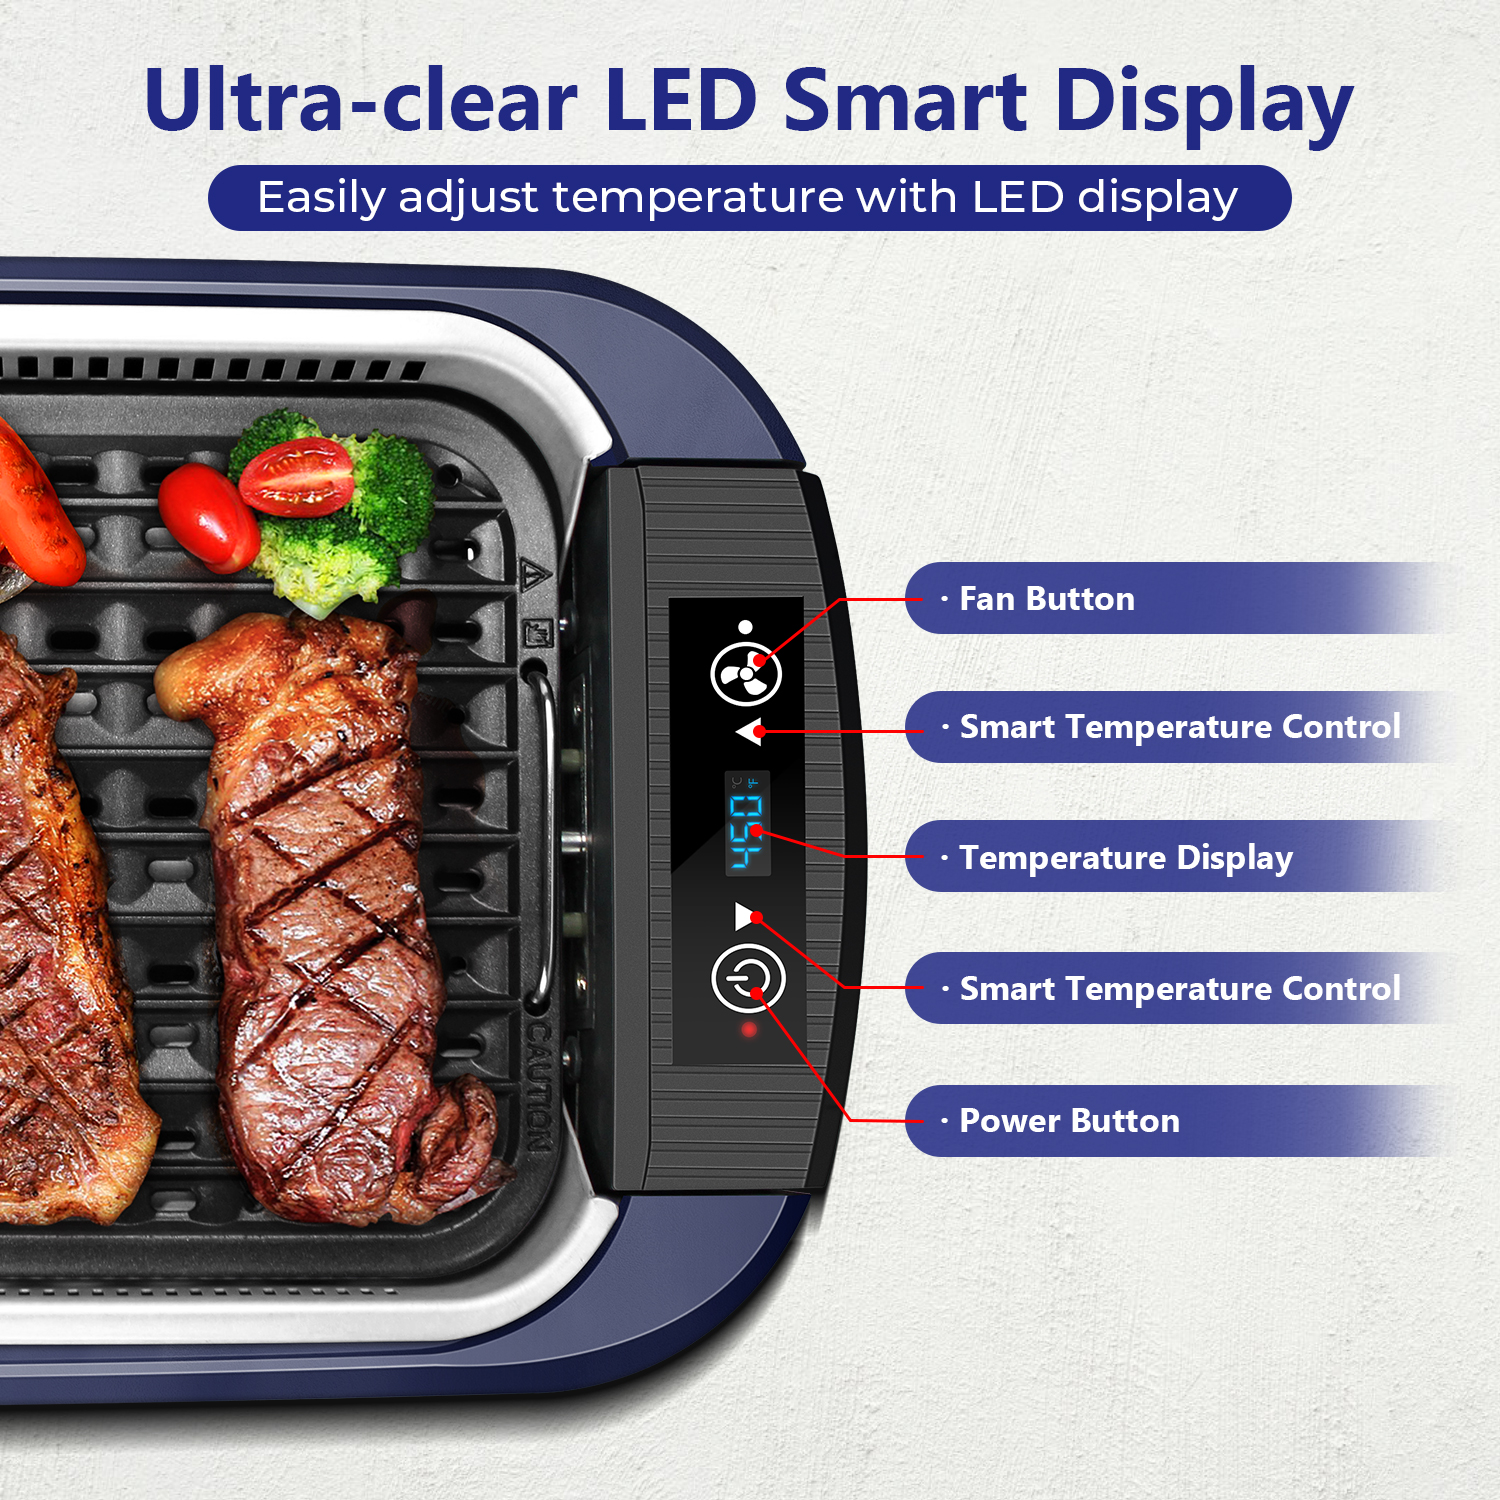 Cusimax Smokeless Indoor Grill Portable Electric Grill with Turbo Smok